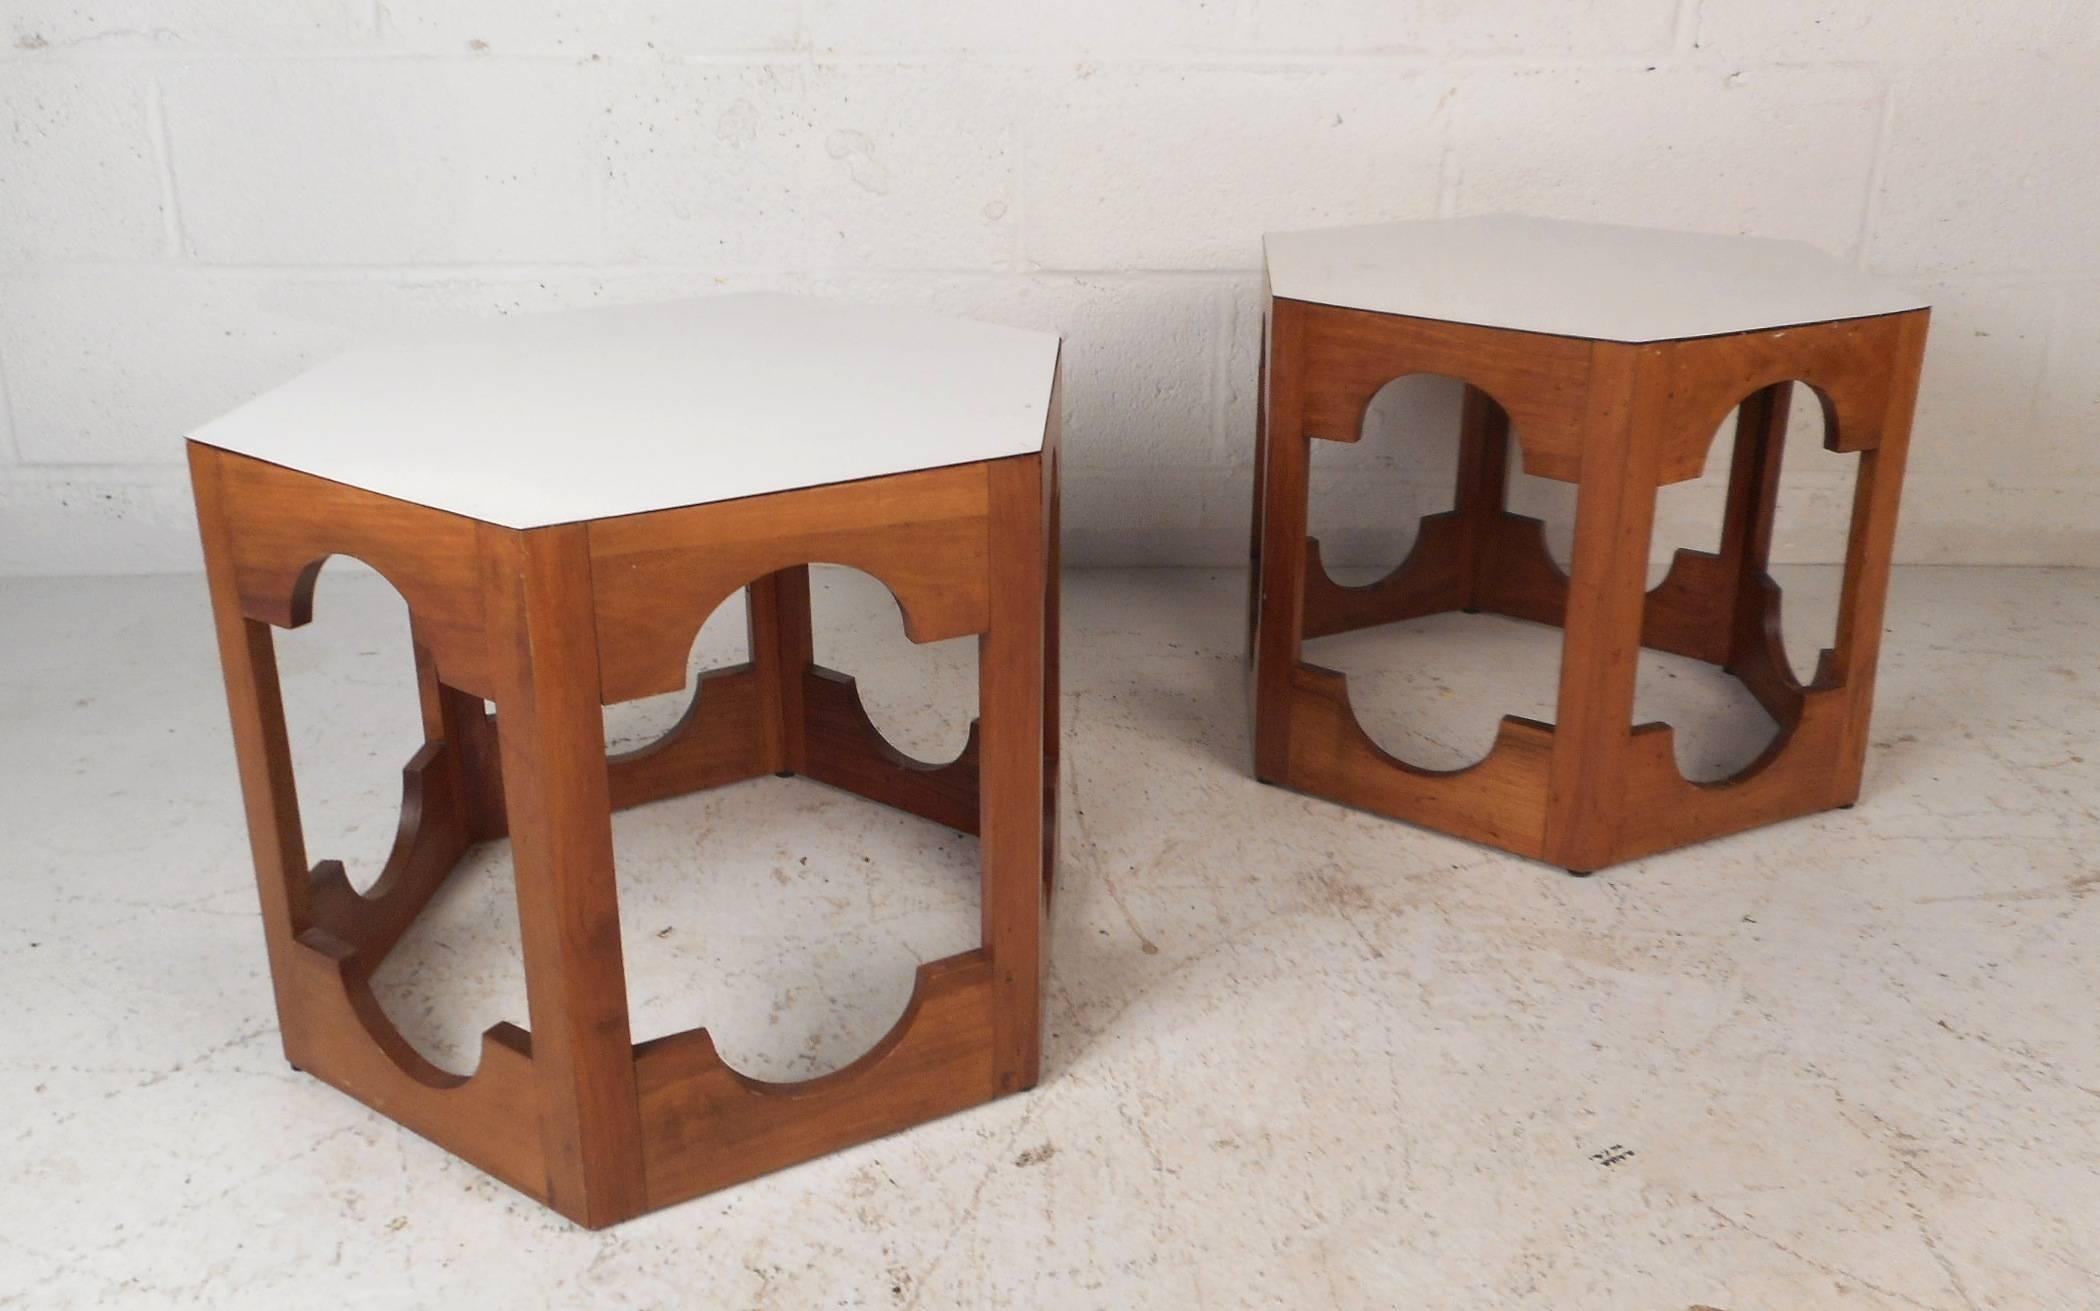 This beautiful pair of vintage modern end tables feature a white laminate top and a walnut base. Sleek design with unusual cut-out designs on all sides and a hexagonal shape. Versatile midcentury pieces function as pedestals, end tables, or simply a